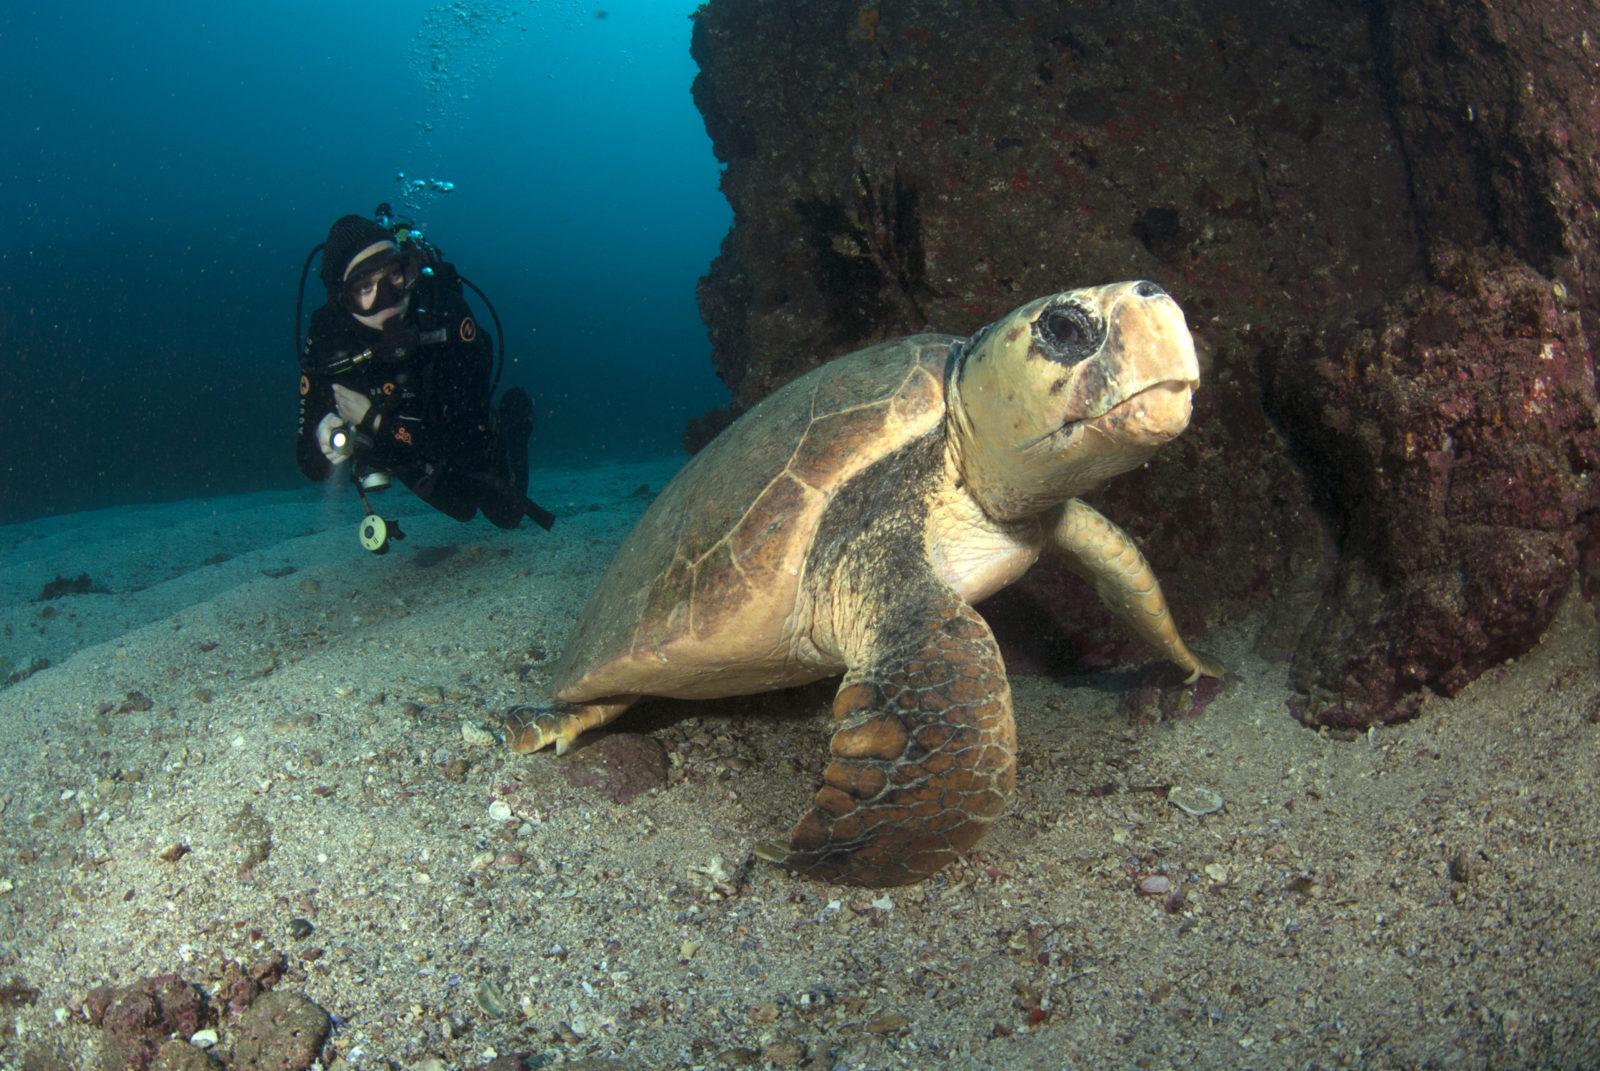 A Guide to Some of Australia's Best Dive Sites